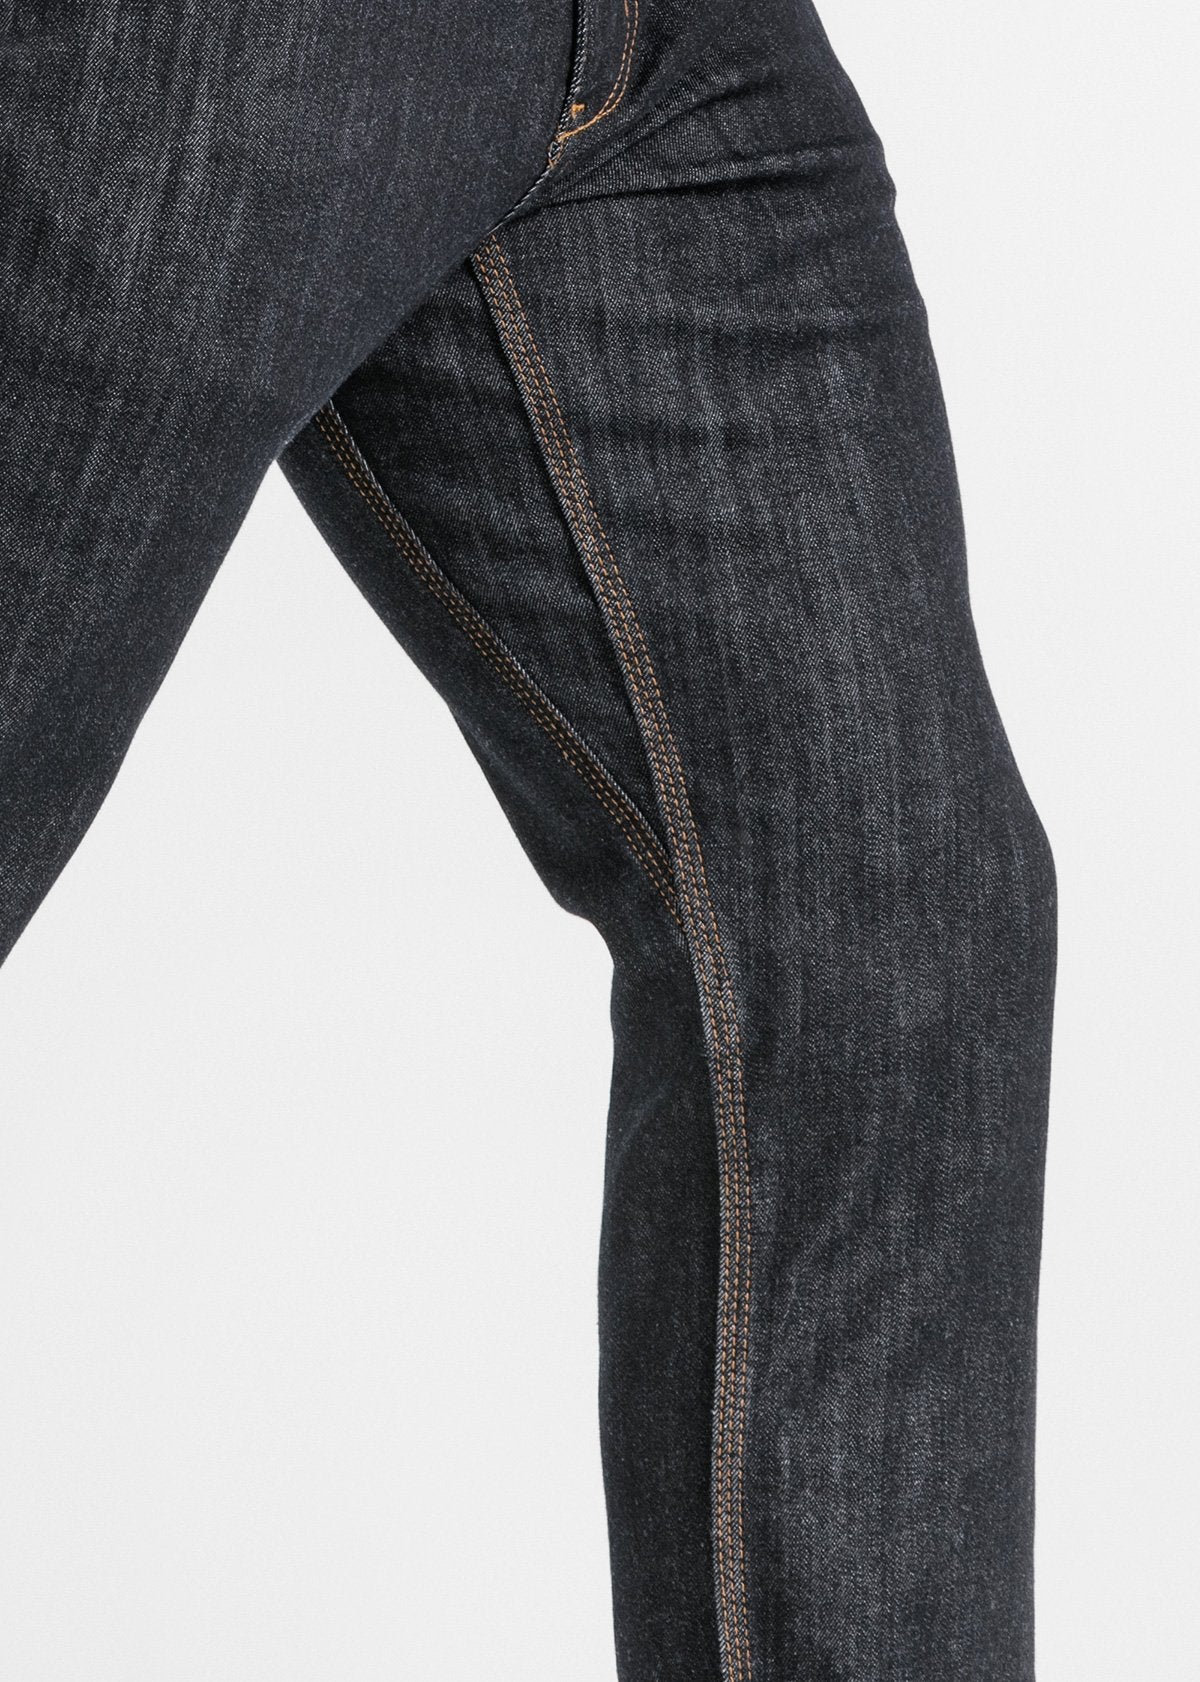 Men's Relaxed Fit Fleece Stretch Jeans